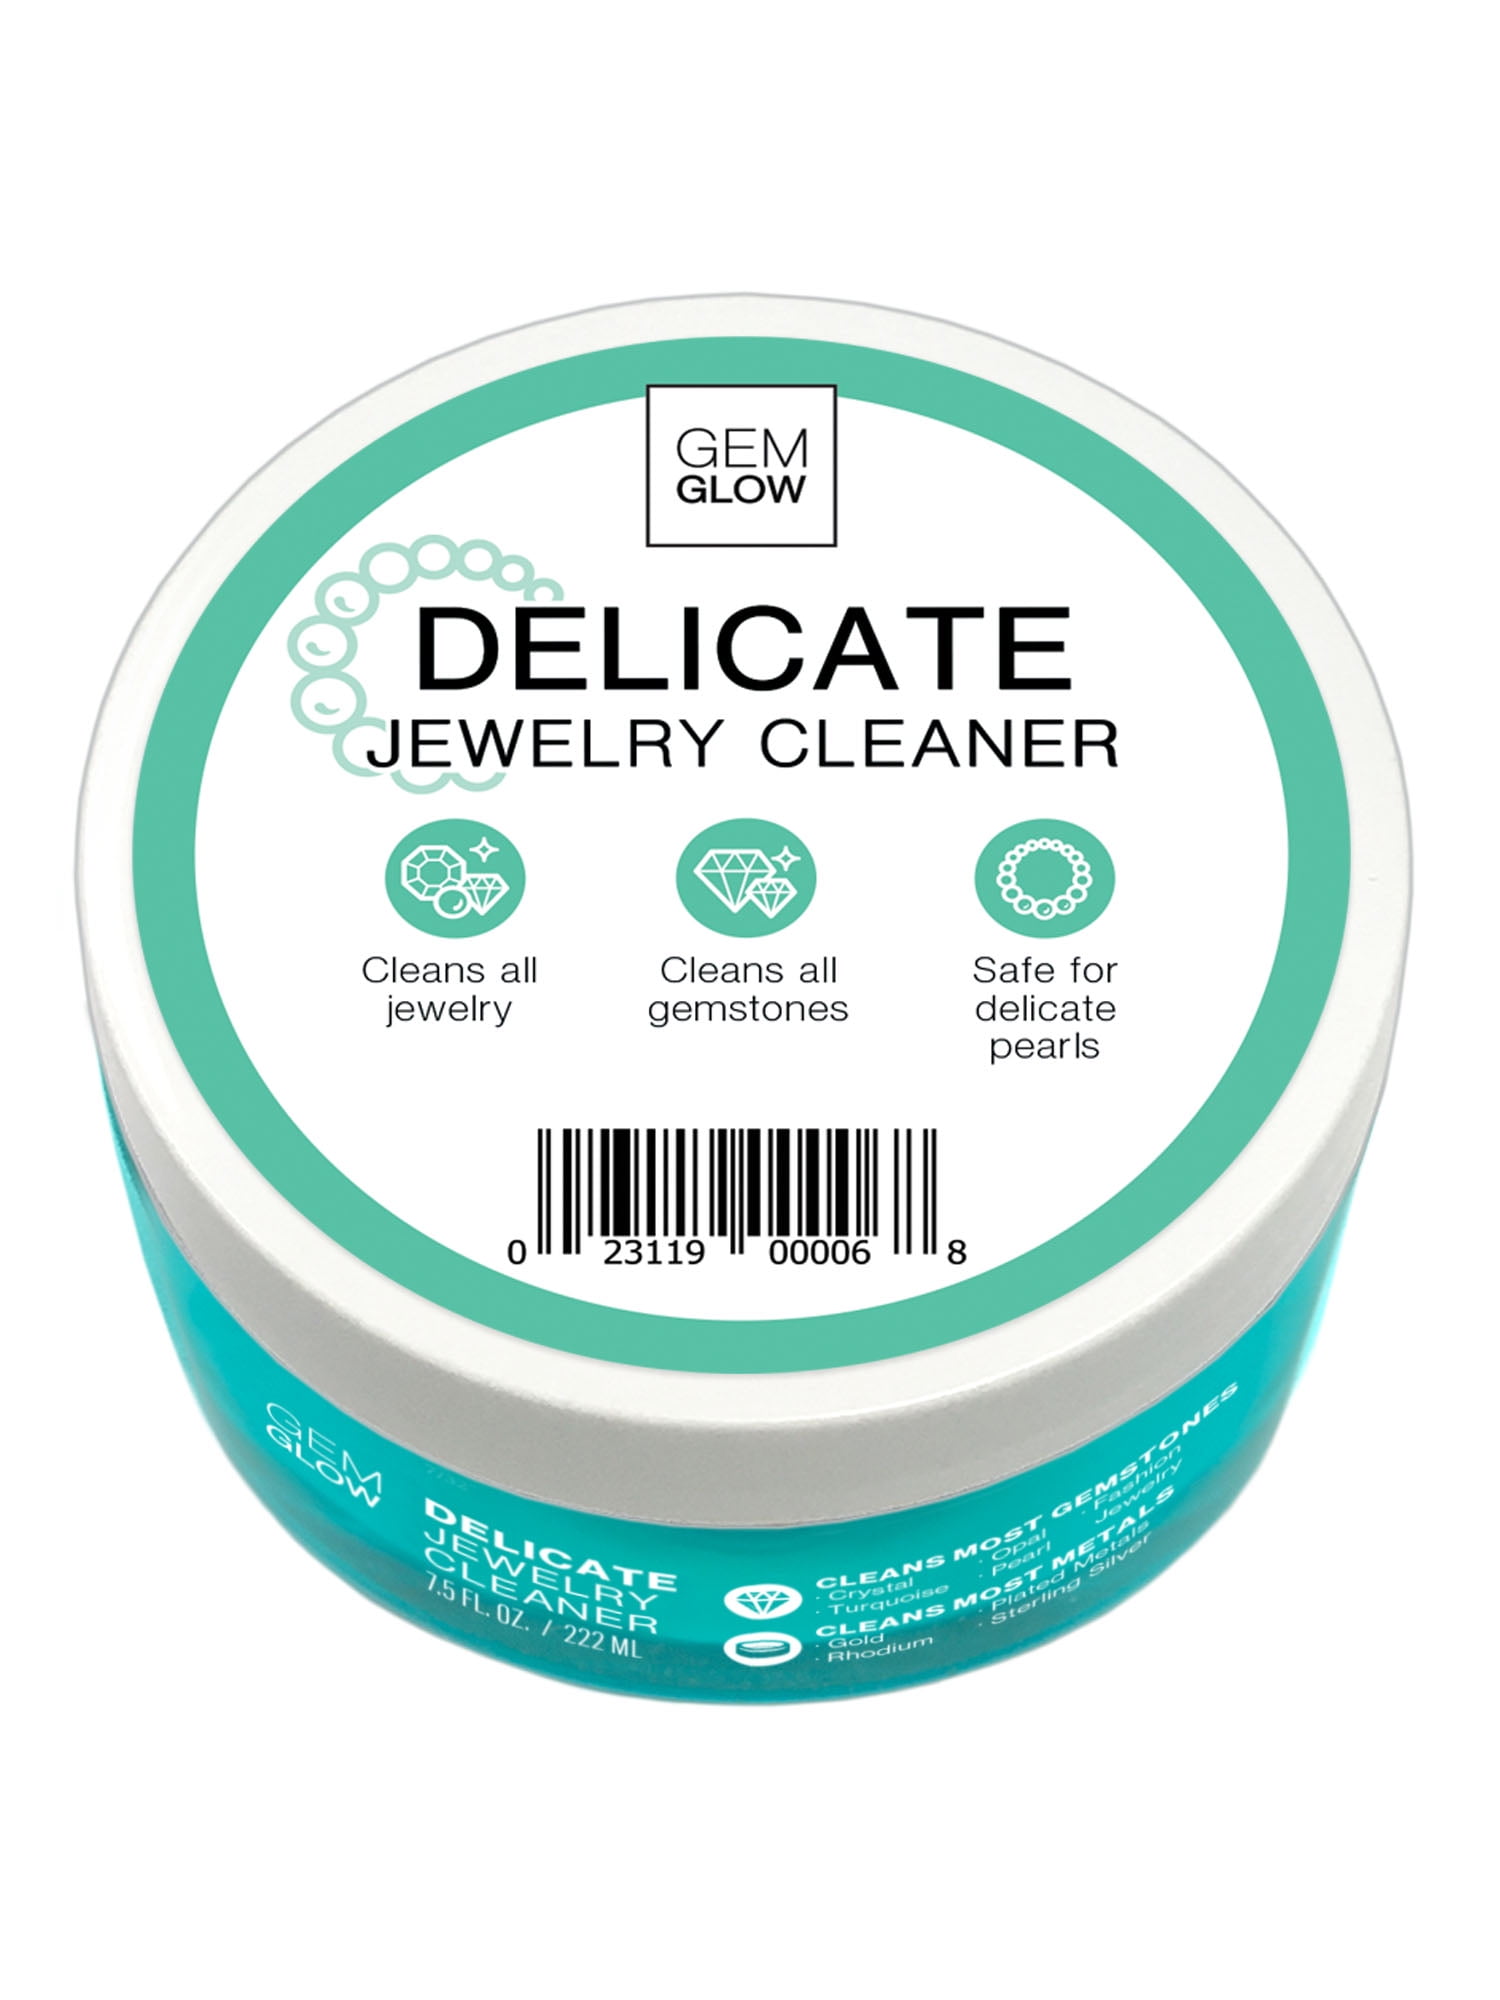 Gem Glow Delicate Jewelry Cleaner for All Jewelry Types, 7.5 fl oz, inc  Jewelry dipping basket and touch-up brush 